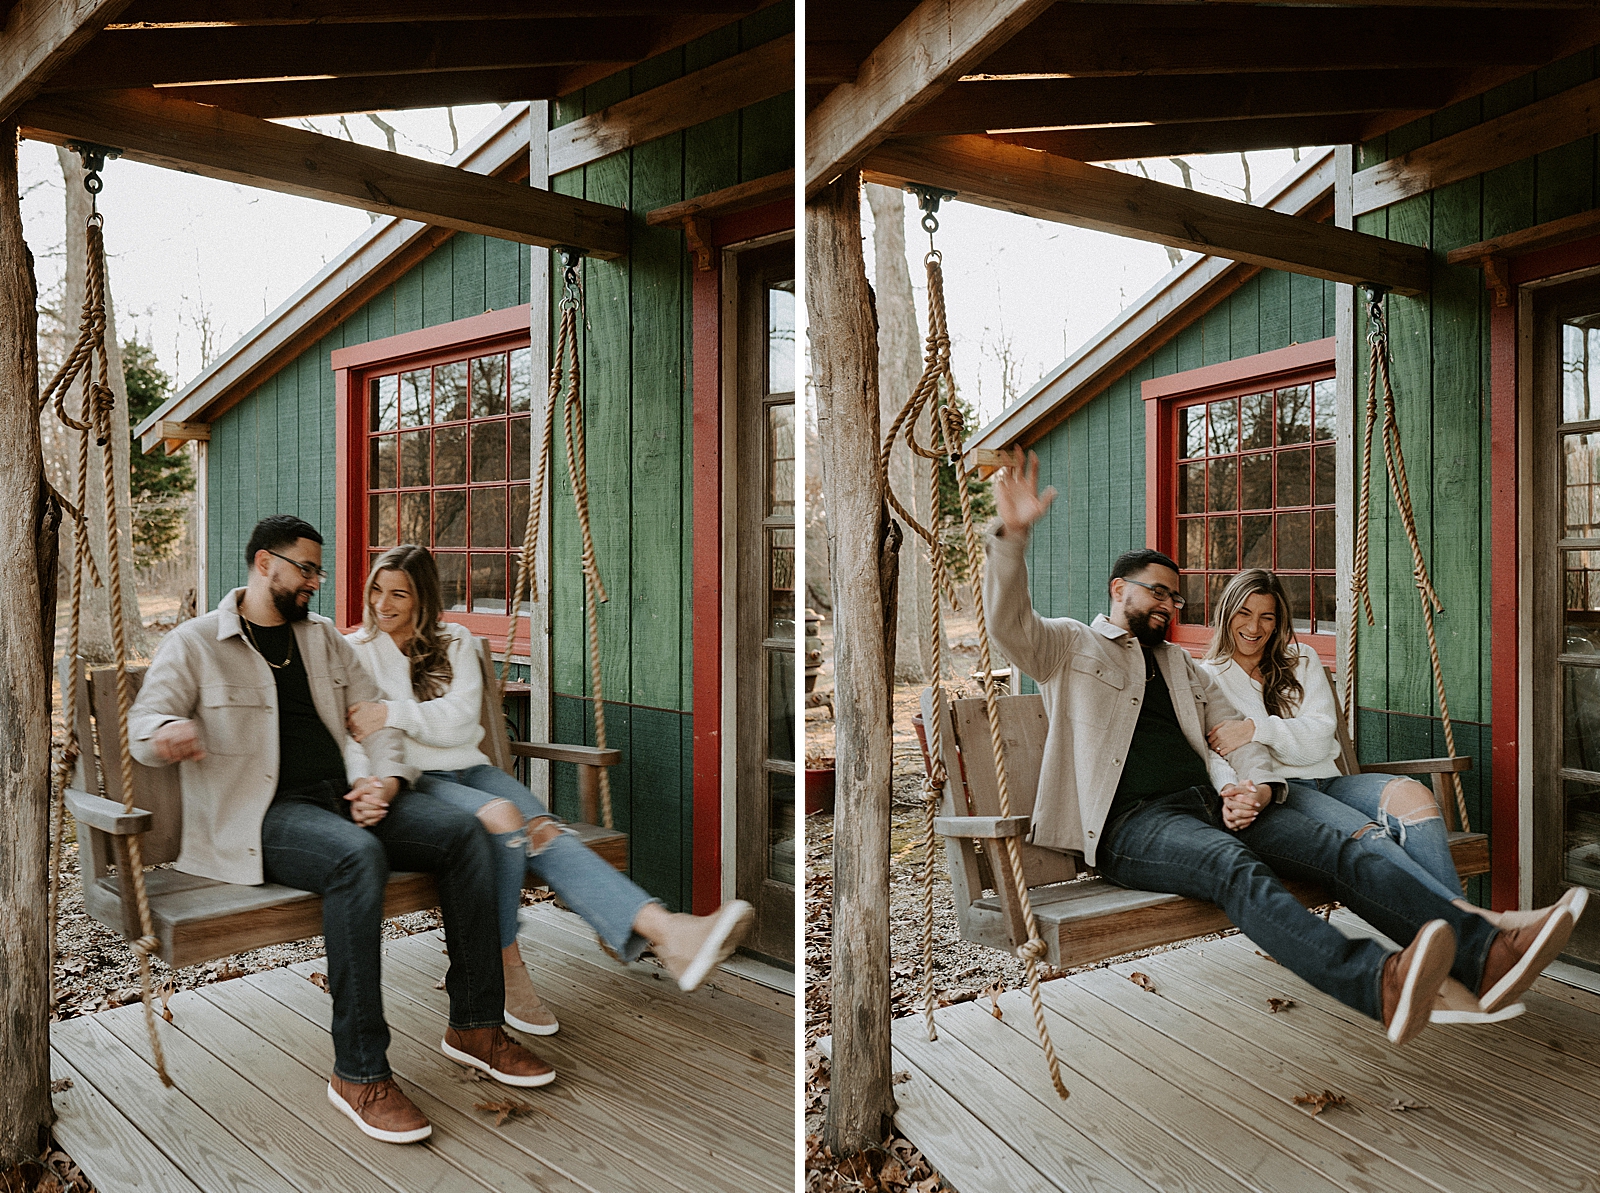 Couple sitting on hanging wooden bench with legs up in the air